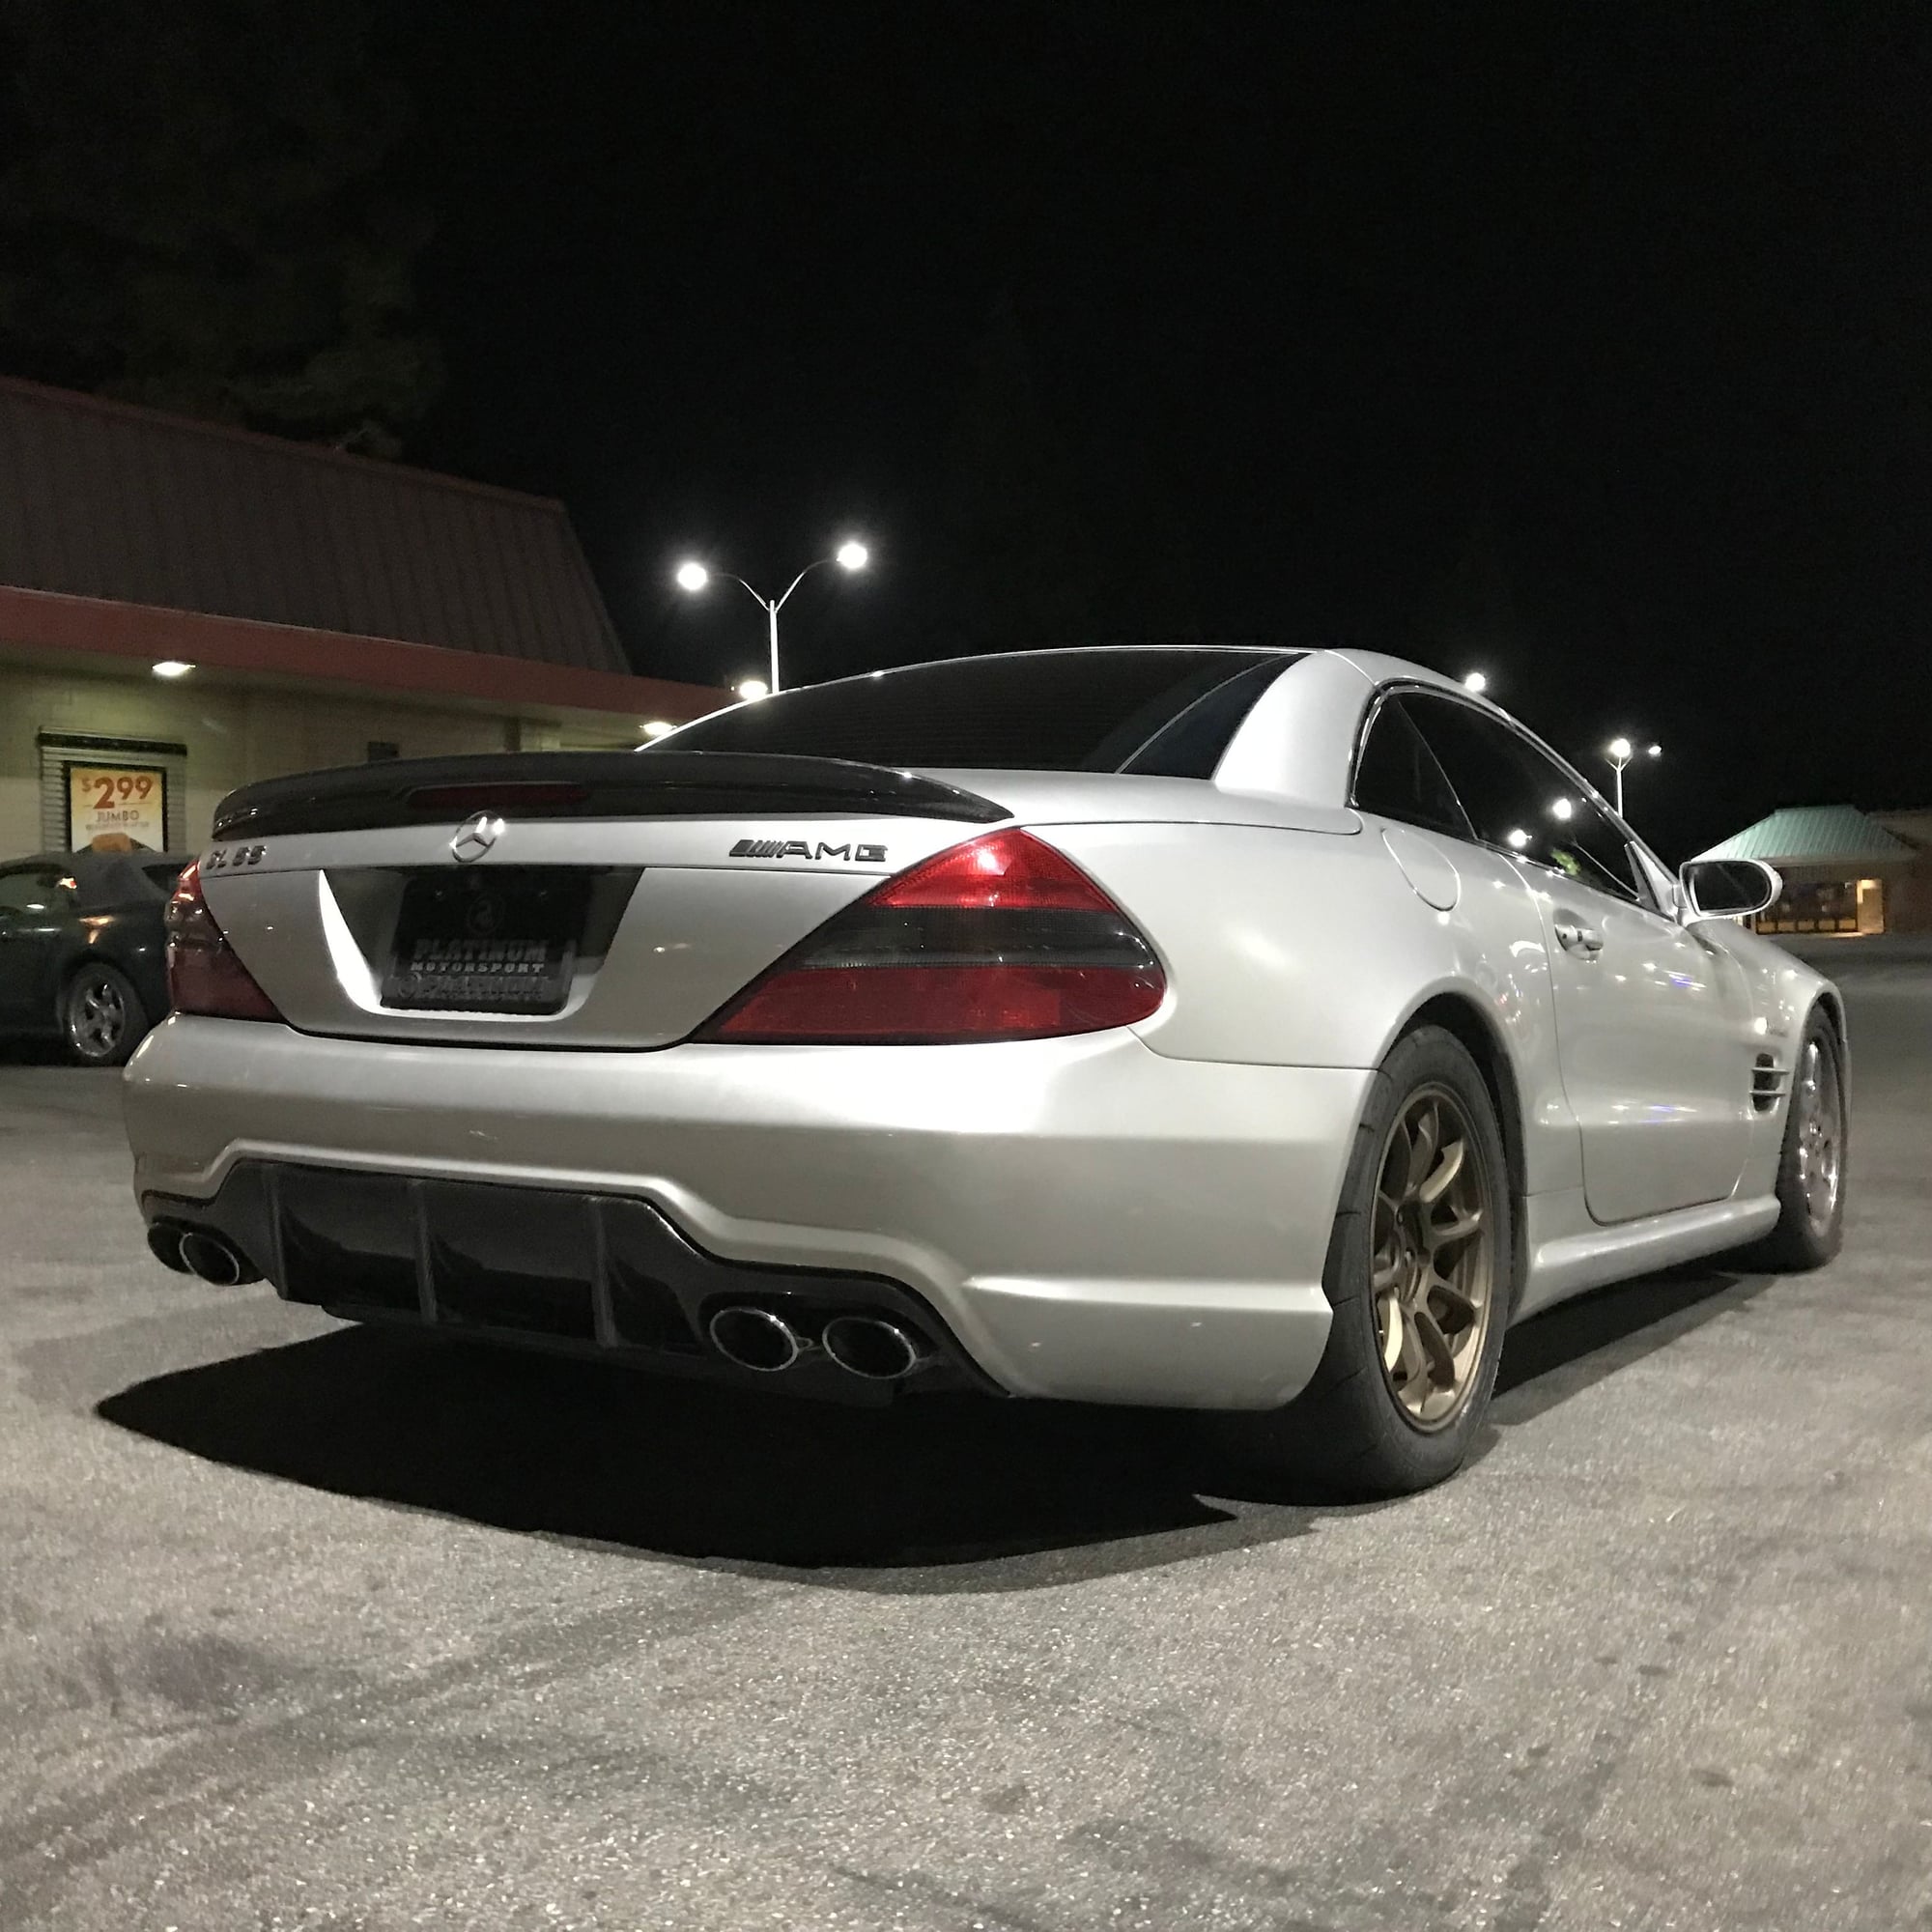 2004 Mercedes-Benz SL55 AMG - SL55 Amg low miles for sale - Used - VIN wdbsk74f94f065747 - 70,000 Miles - 8 cyl - 2WD - Automatic - Convertible - Silver - Sherman Oaks, CA 91402, United States